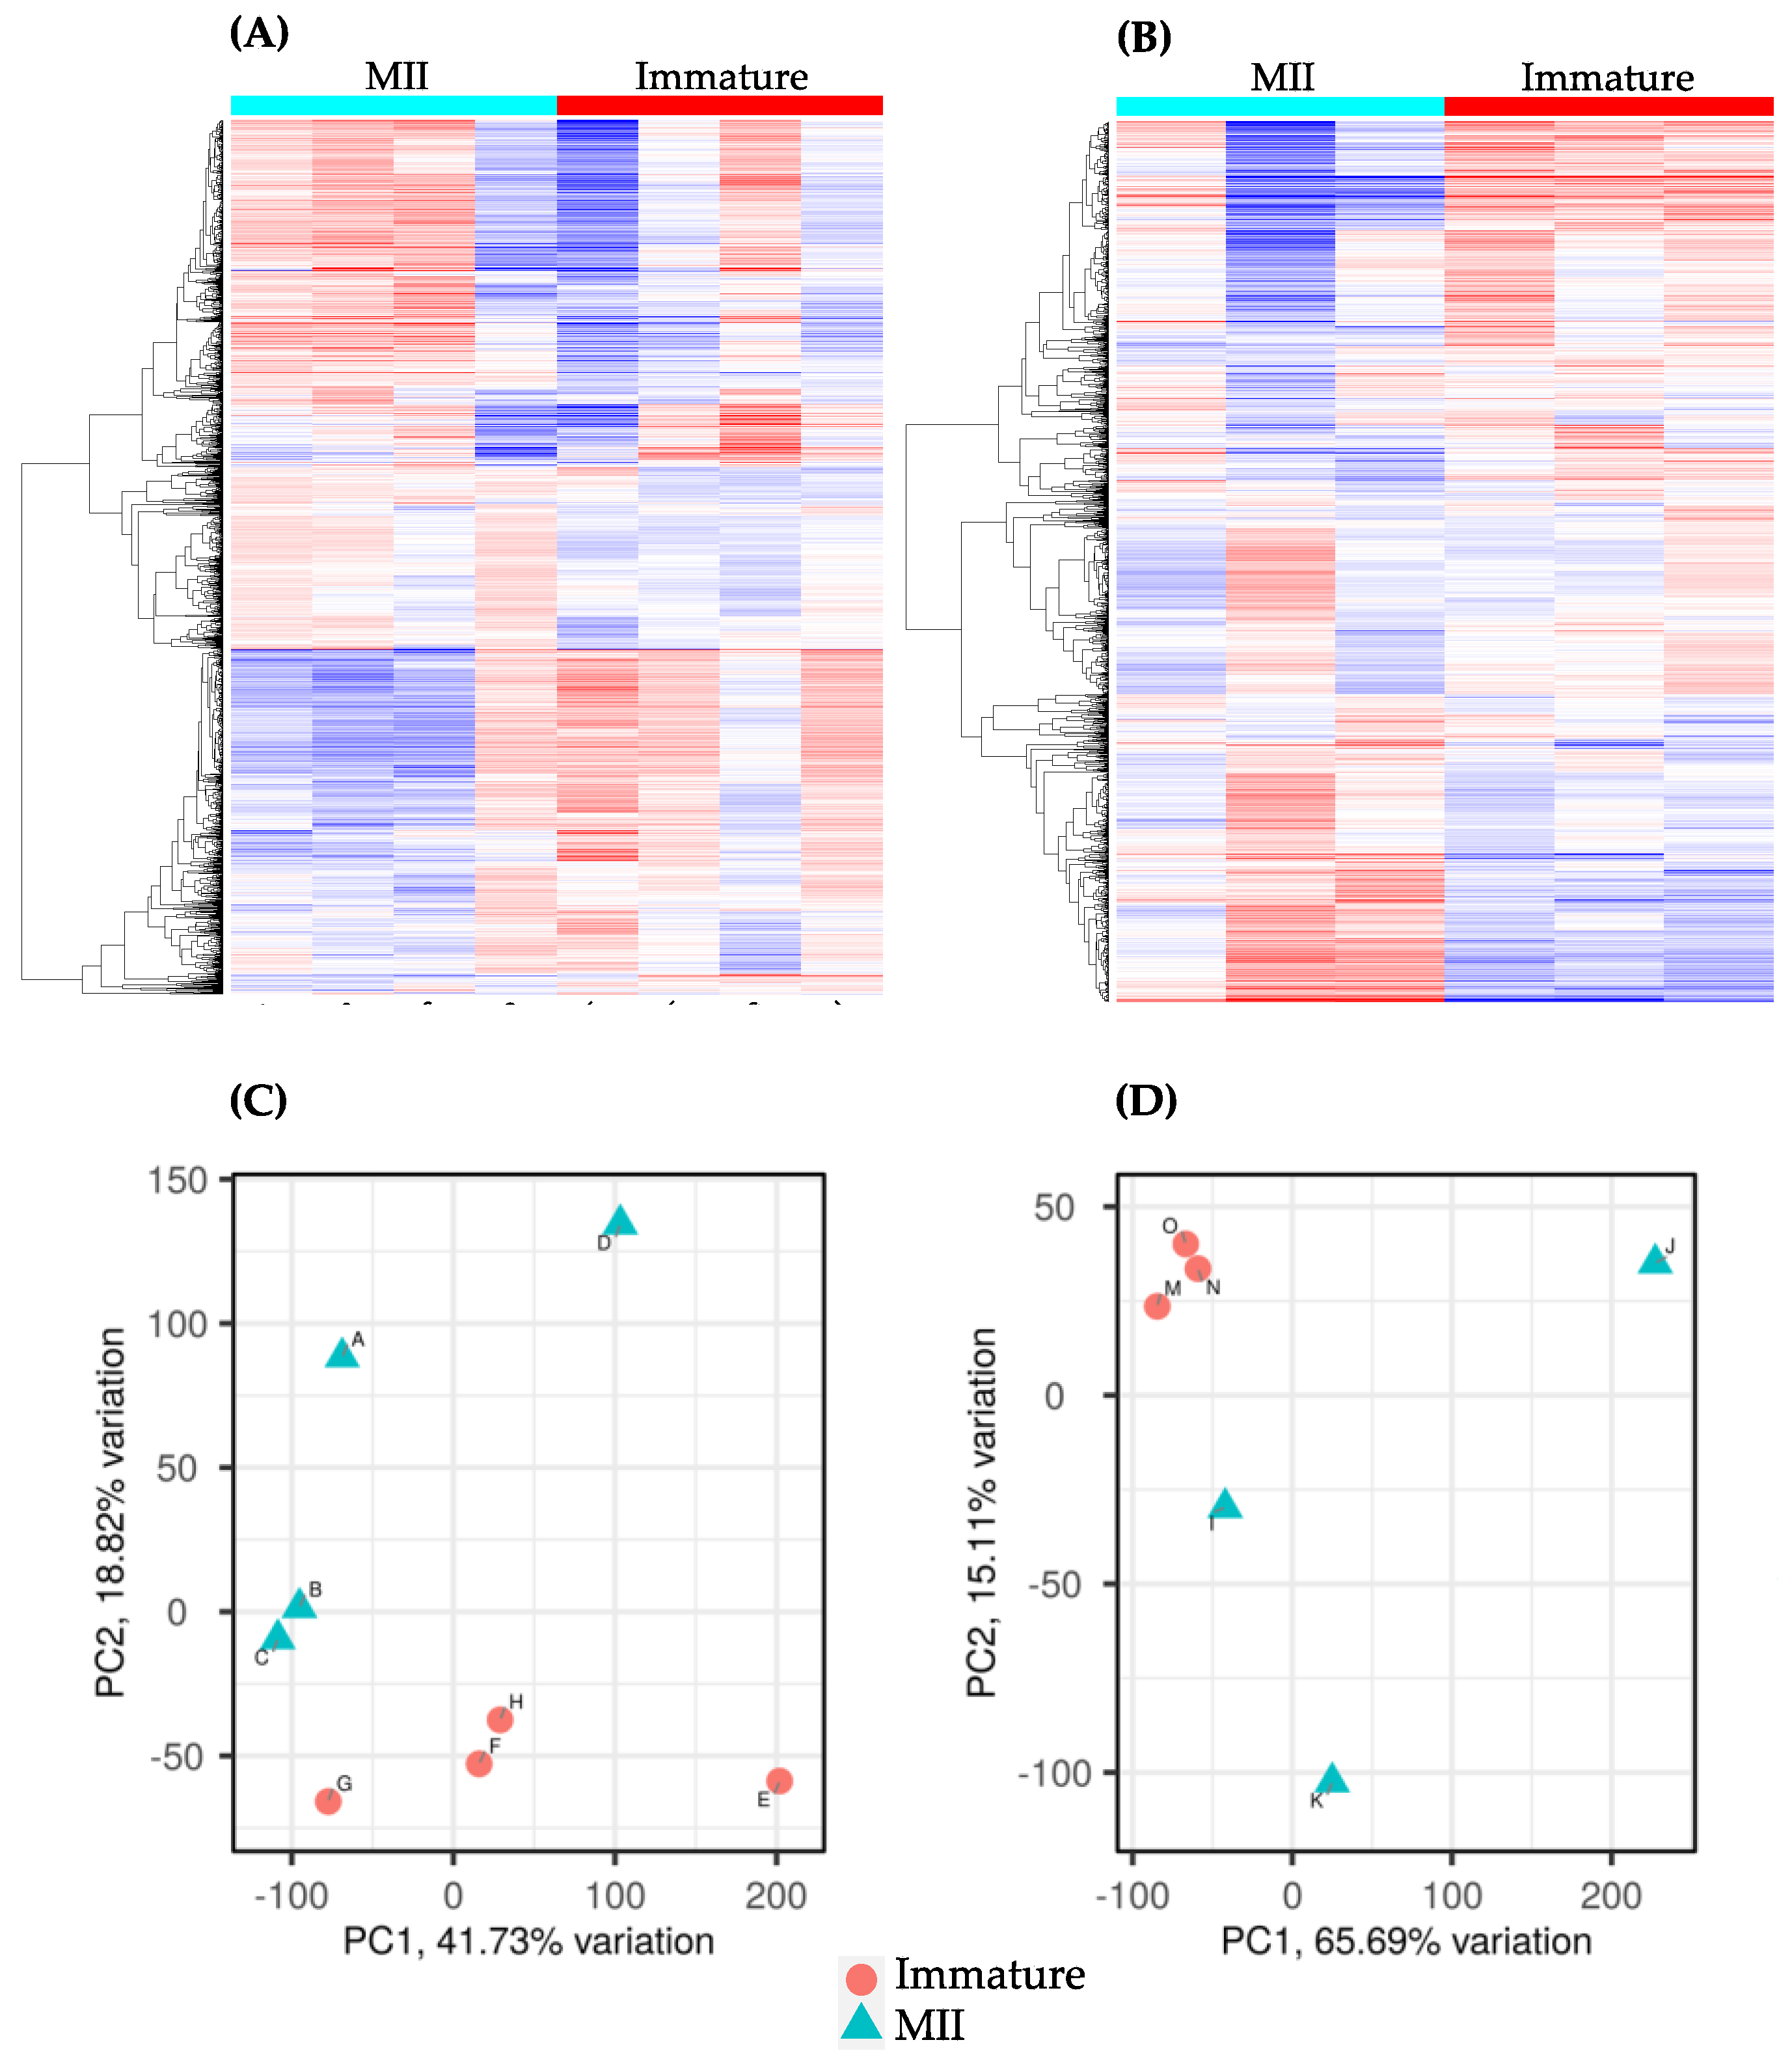 IJMS | Free Full-Text | Transcriptome Signature of Immature and In